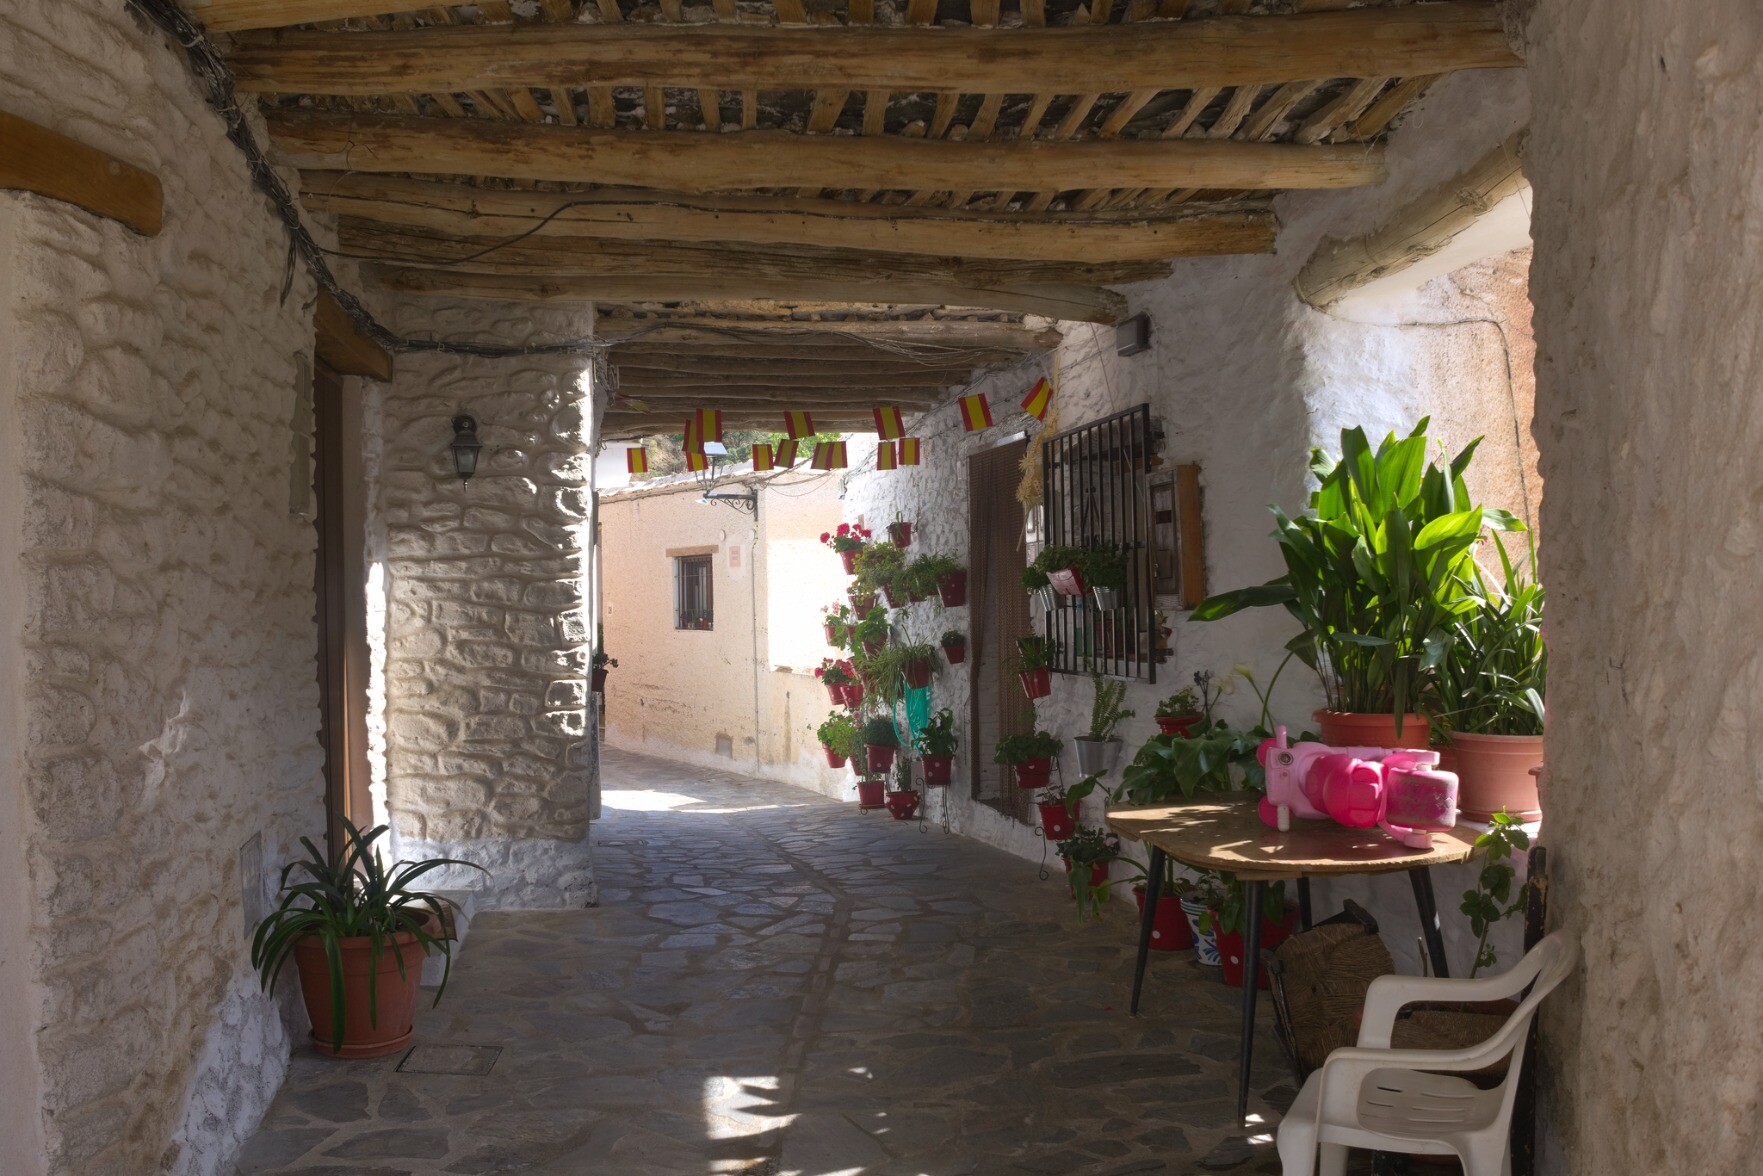 A narrow alleyway with old an building on the left and some open windows on the right. Flowers and colors adorn the sunlit building on the far right